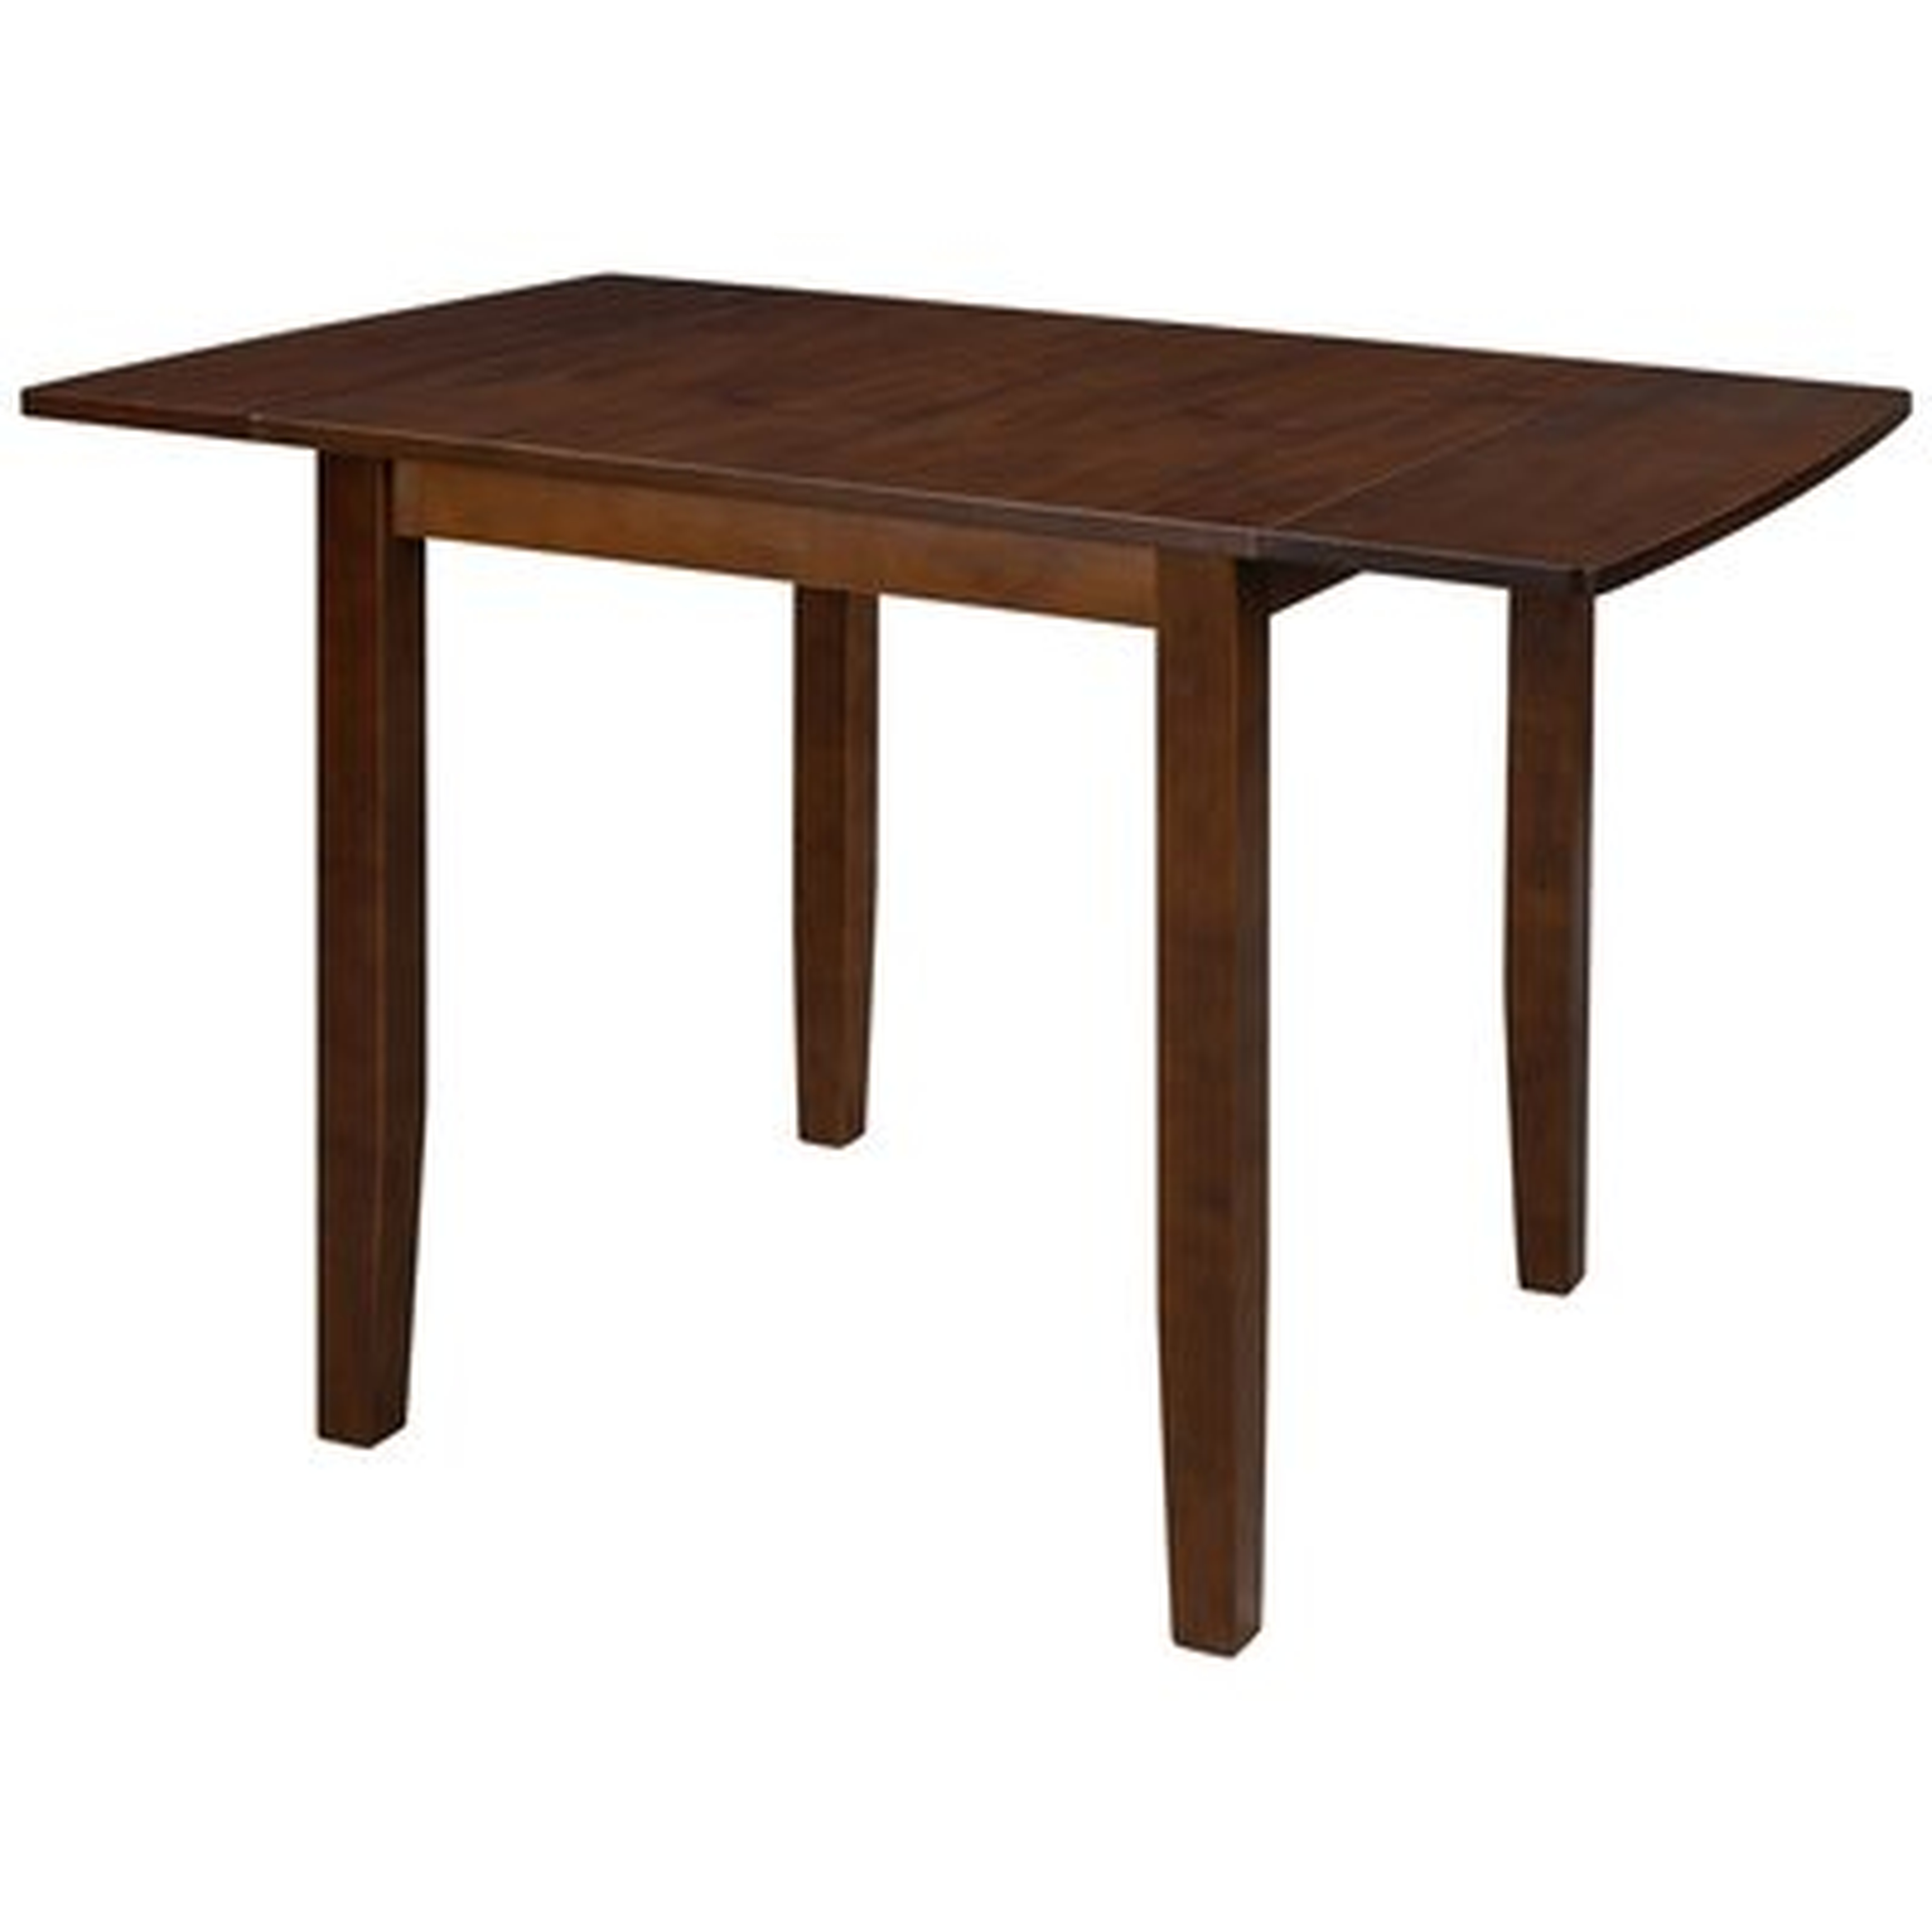 Wood Drop Leaf Breakfast Nook Dining Table For Small Places, Brown - Wayfair